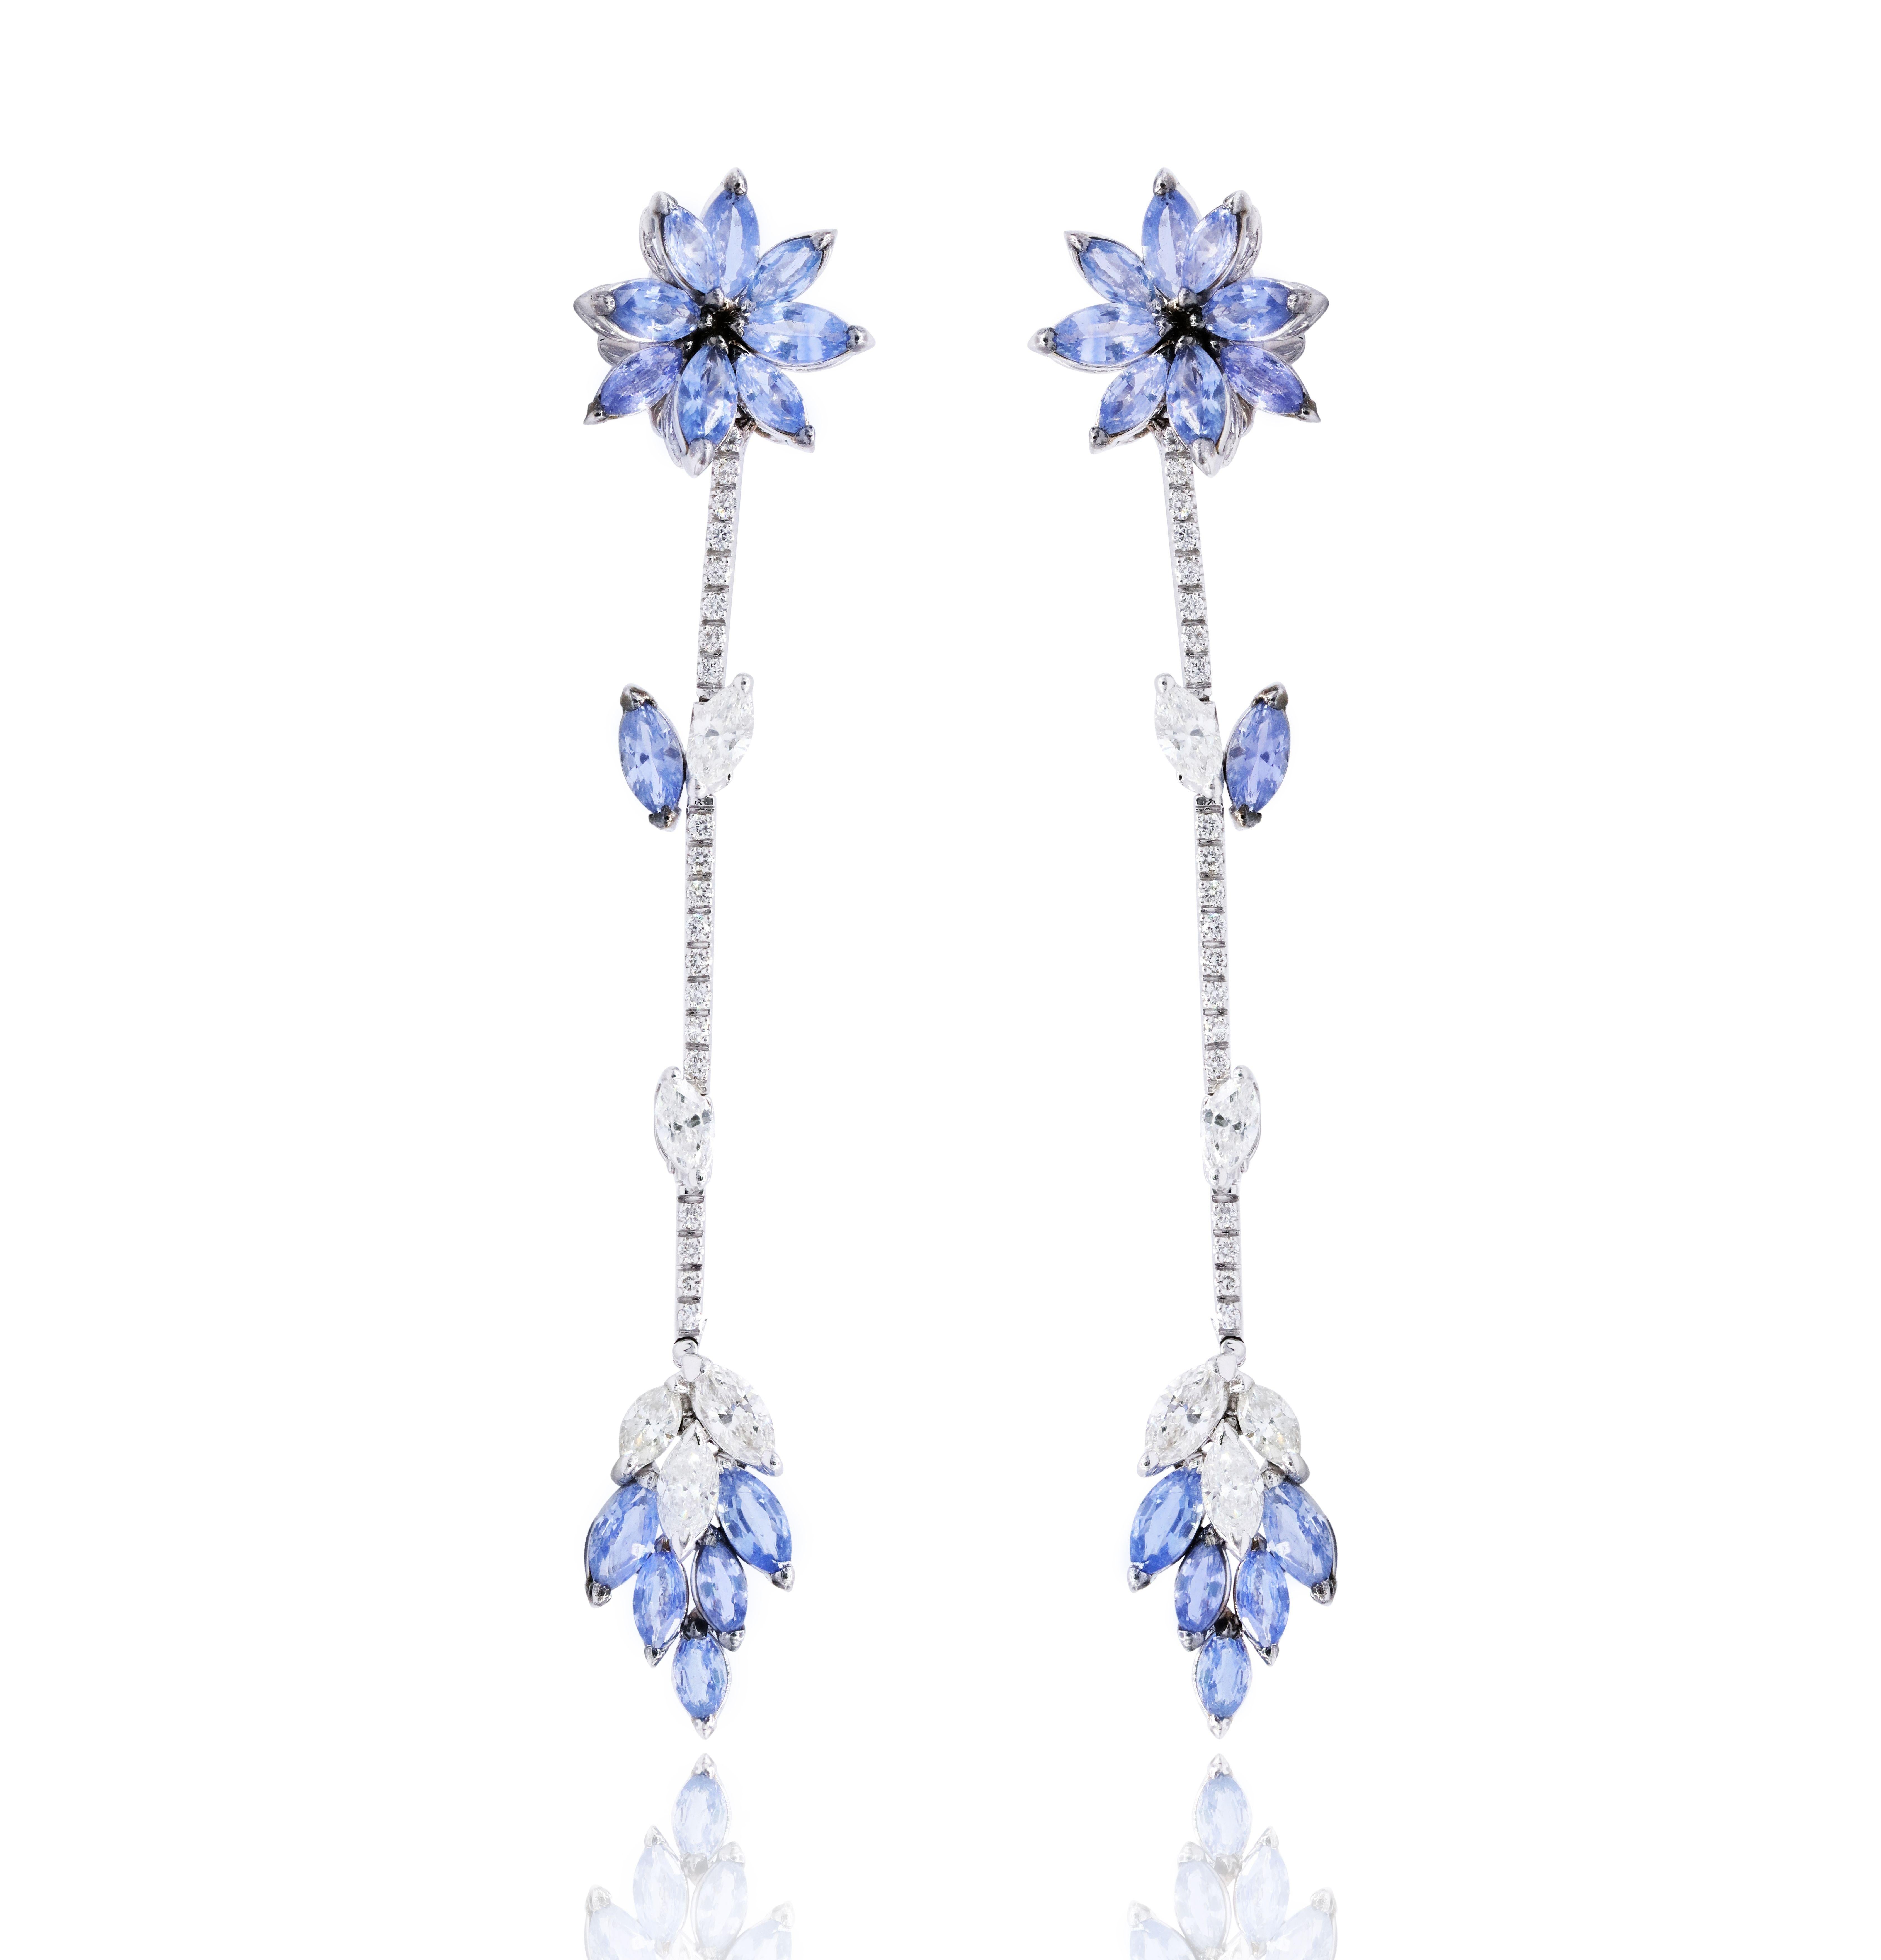 18kt white gold hanging flower sapphires and diamonds, features 6.23 carats of marquise sapphires with 2.05 carats of round and marquise diamonds.